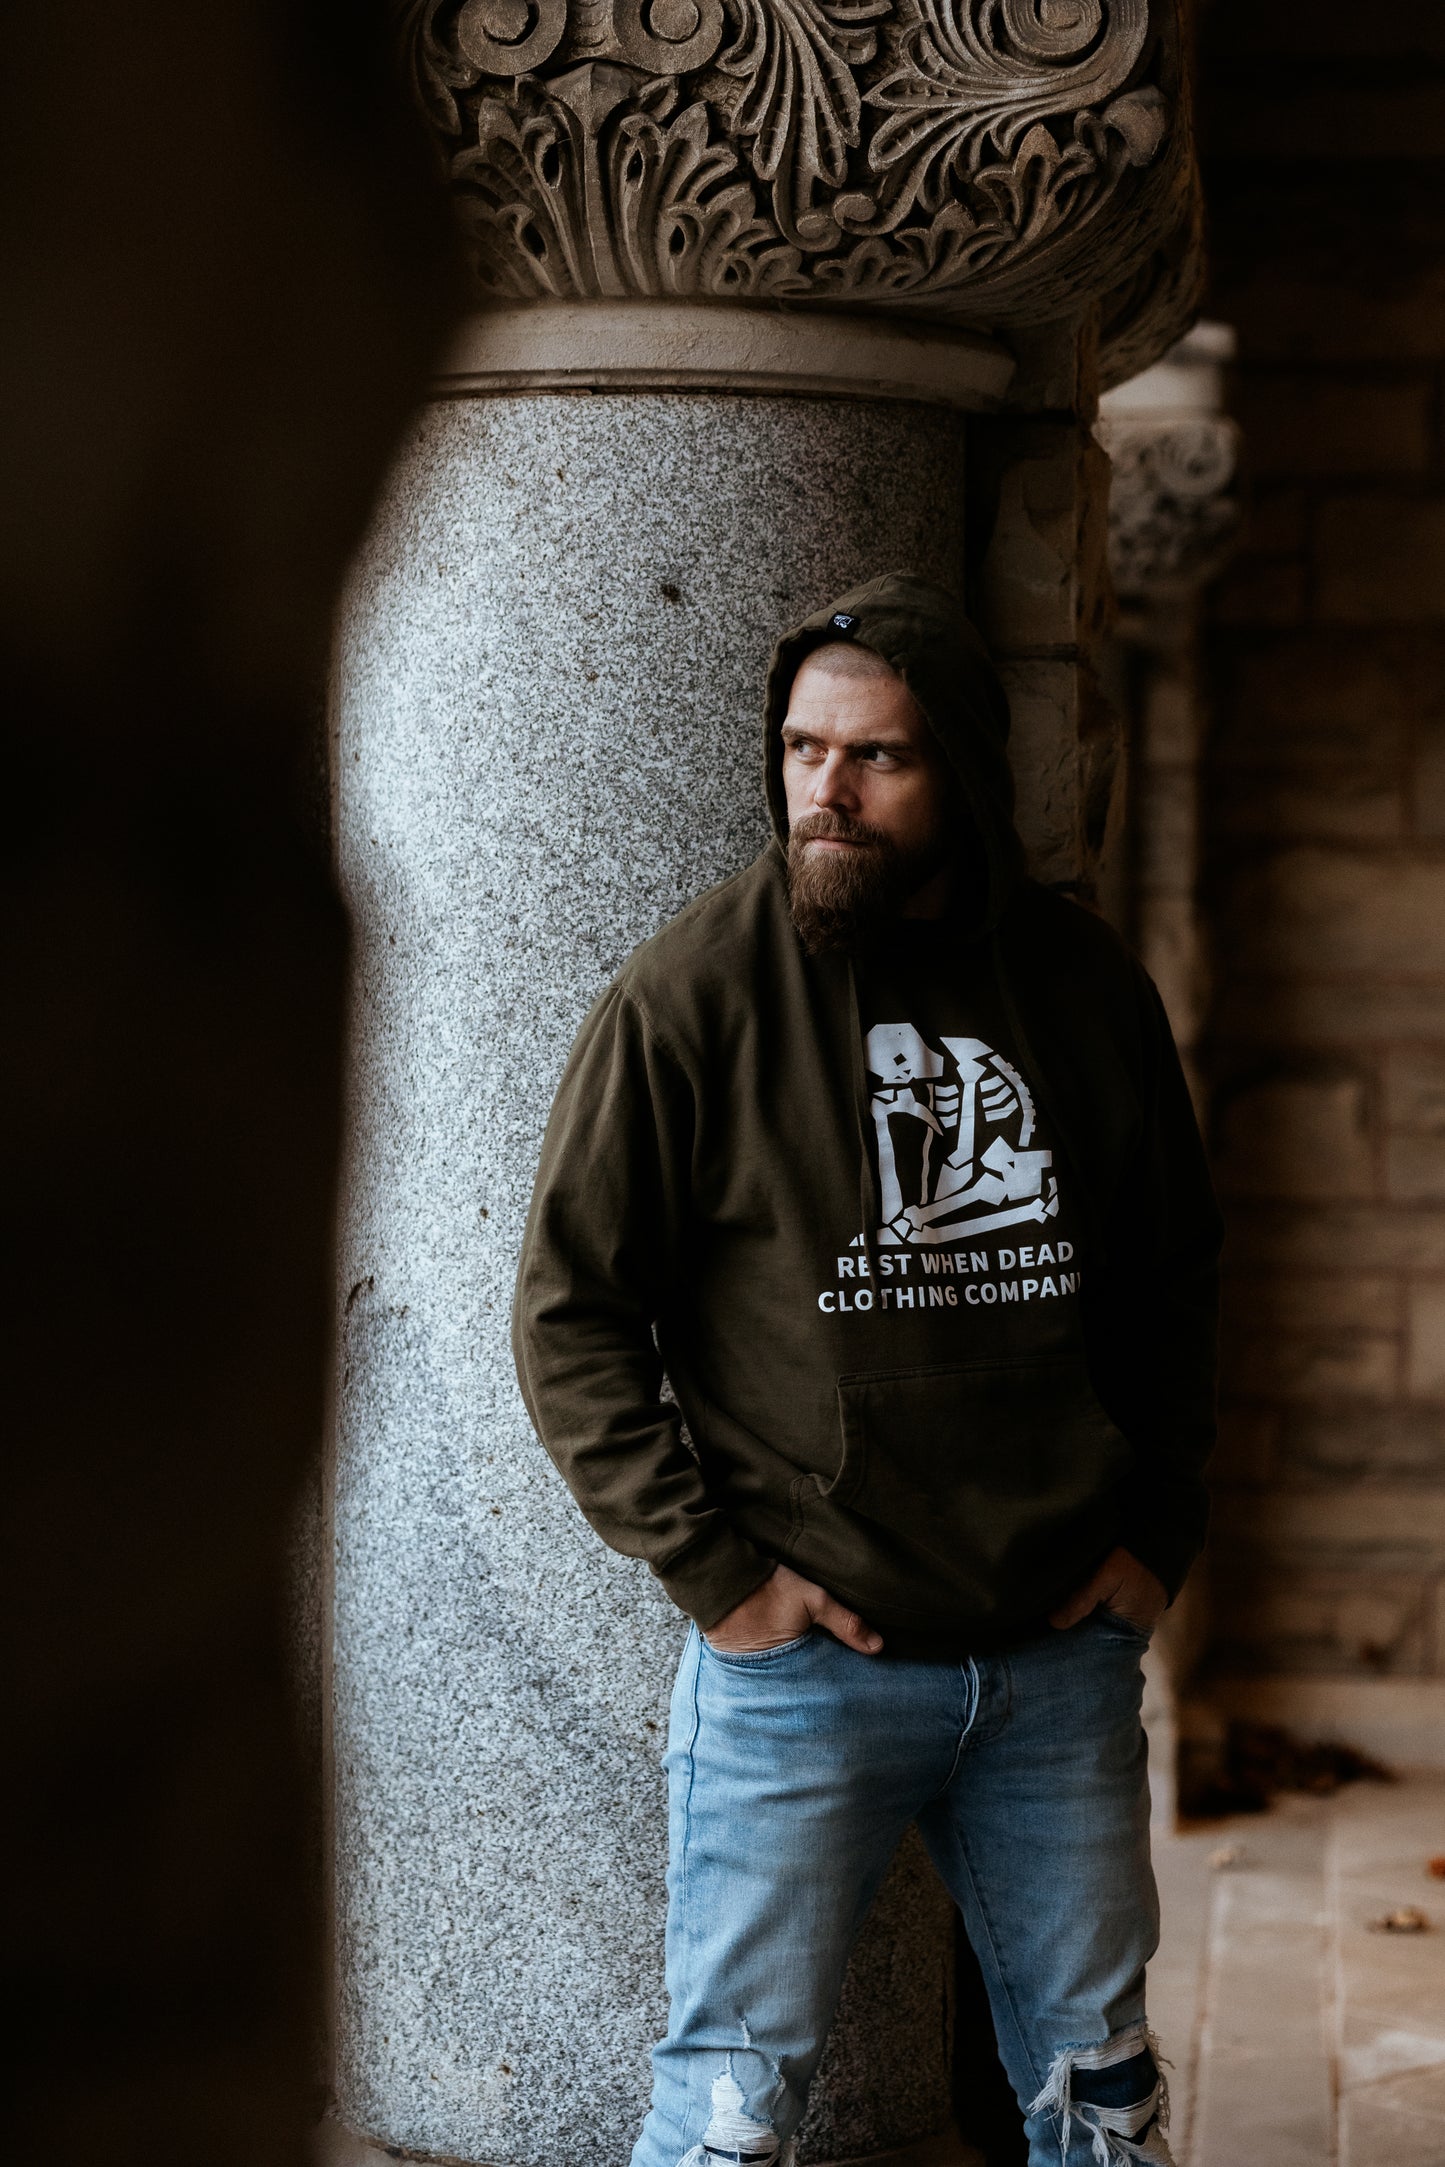 Rest When Dead - Classic Logo Hoodie - Army Green